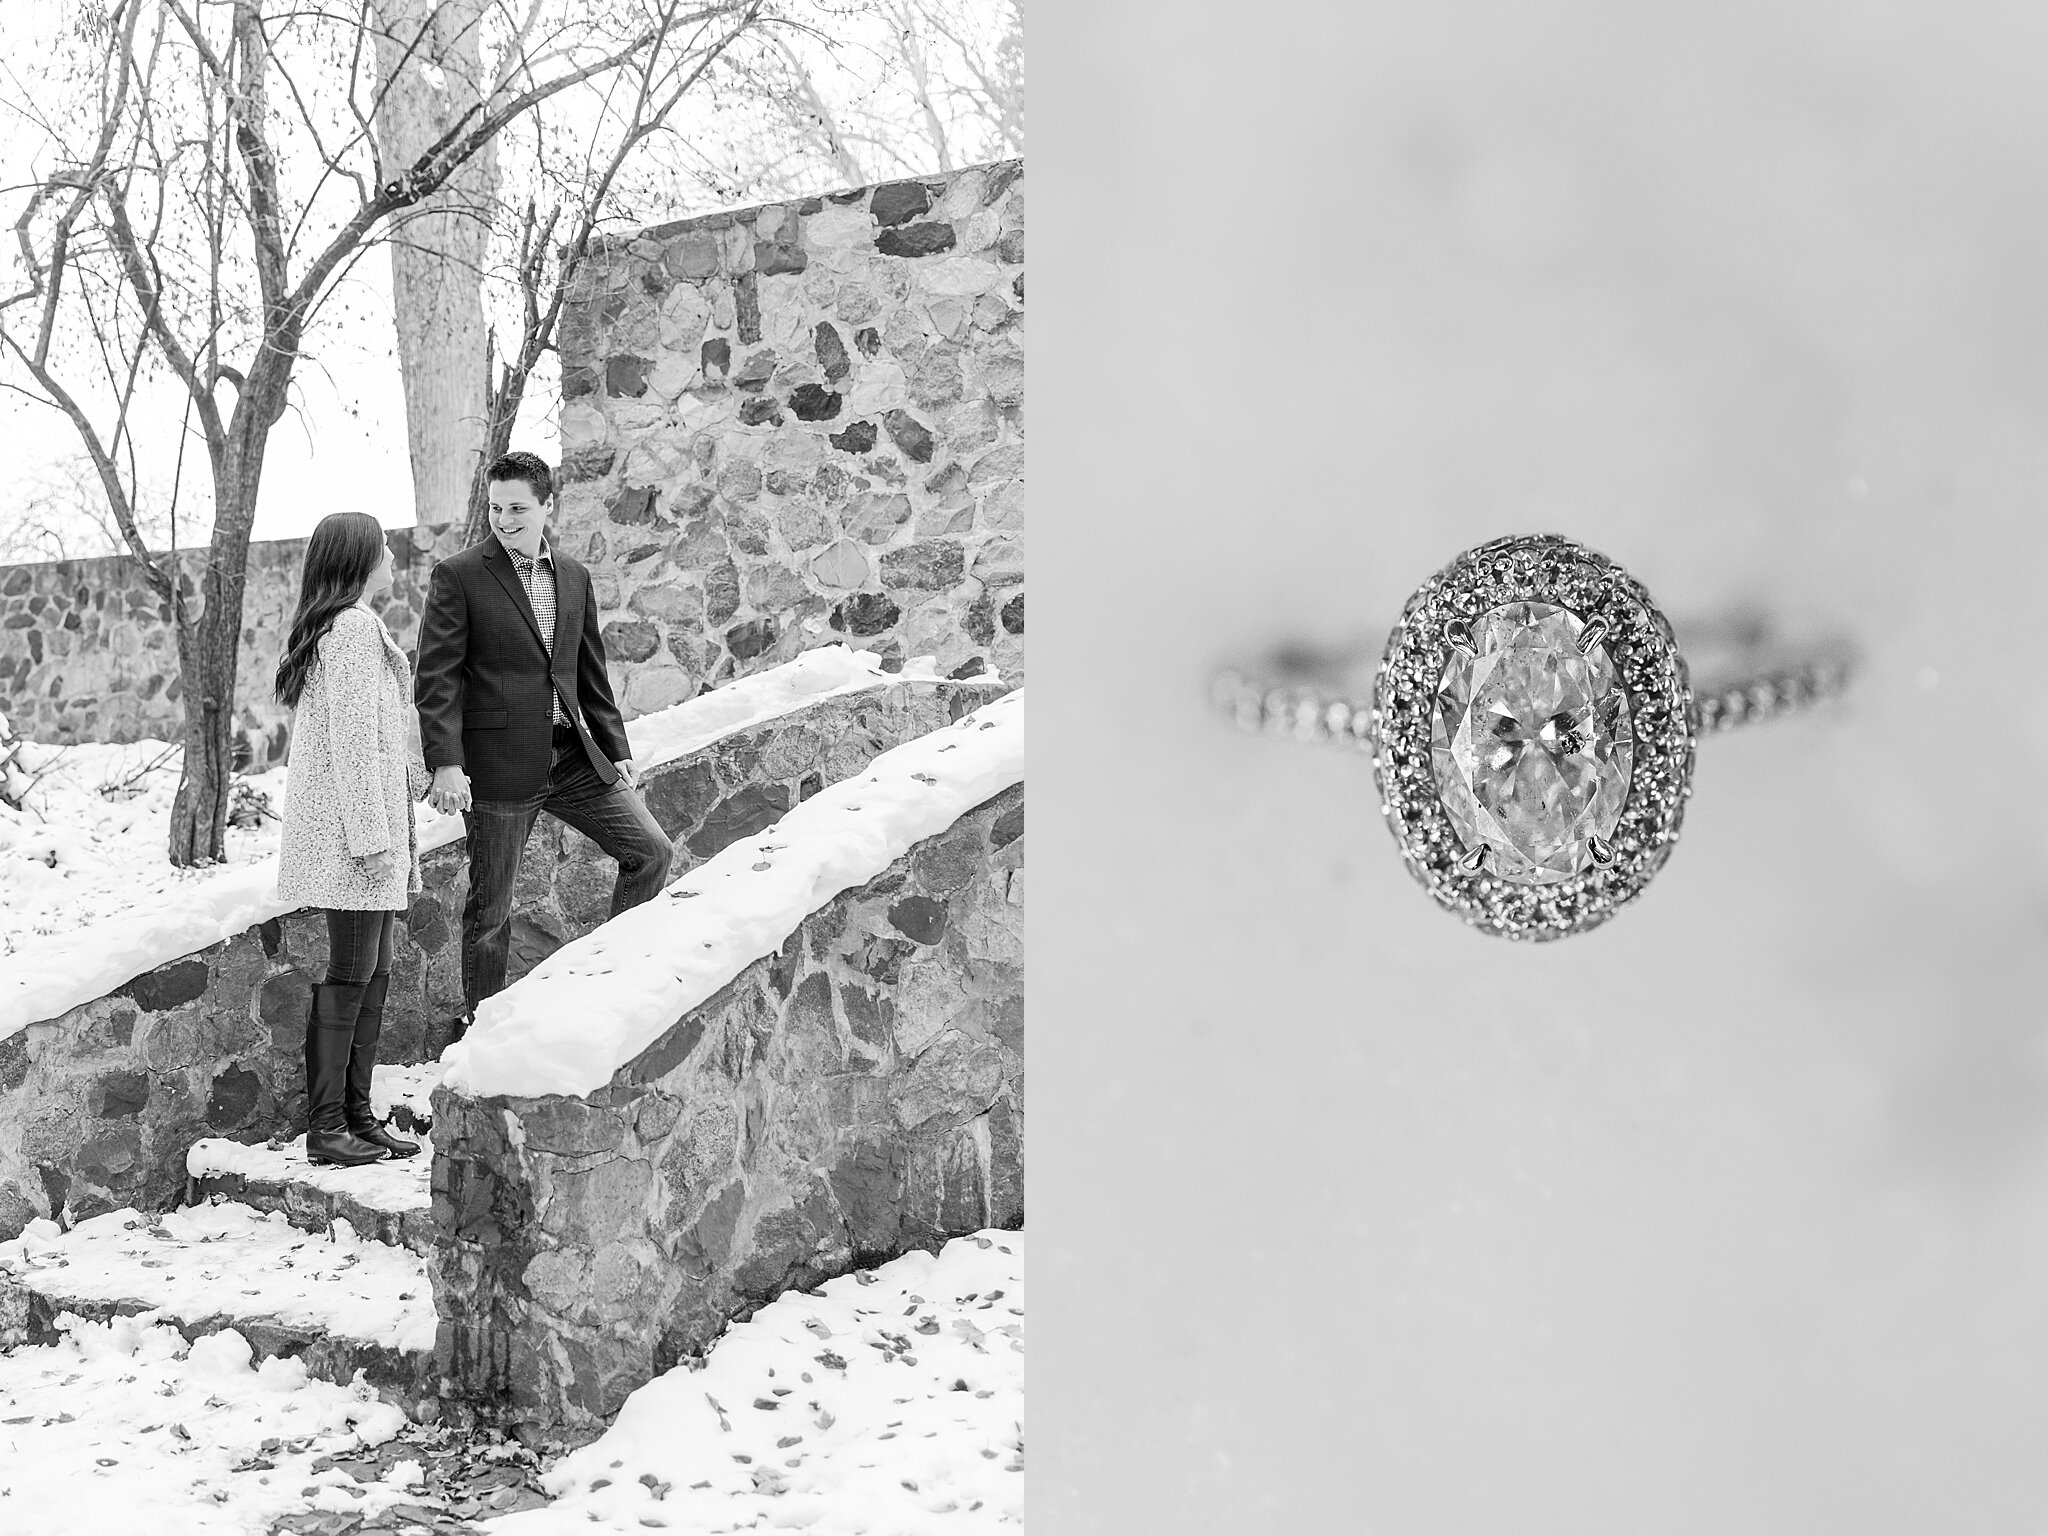 detroit-wedding-photographer-winter-engagement-photos-at-stony-creek-metropark-in-shelby-twp-mi-by-courtney-carolyn-photography_0011.jpg